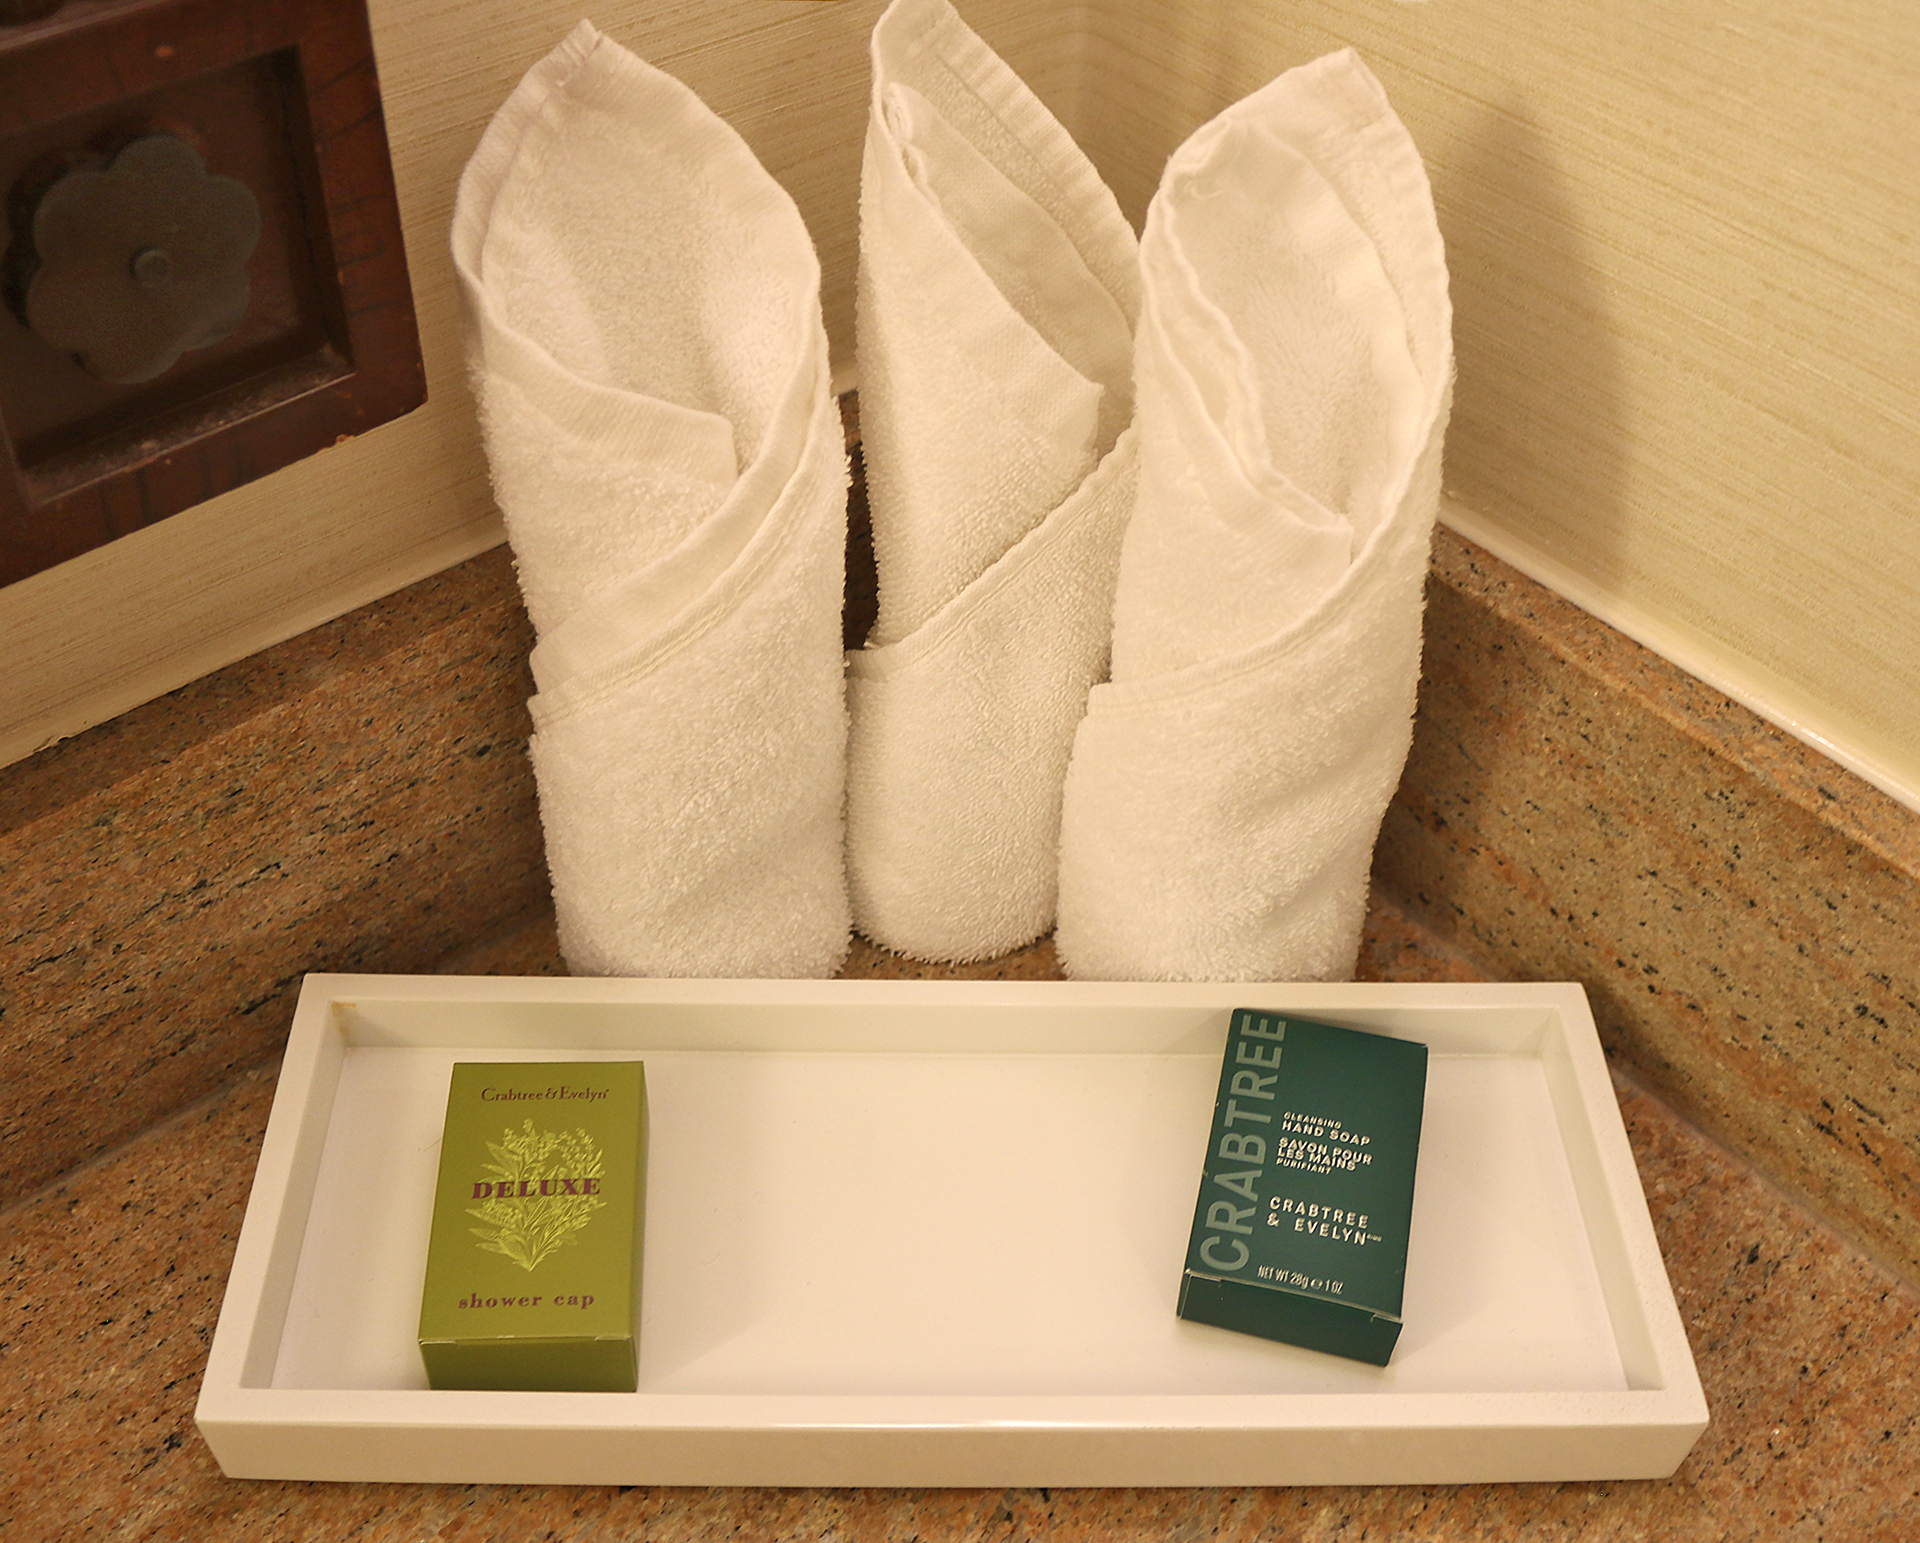 a tray with towels and a box on it